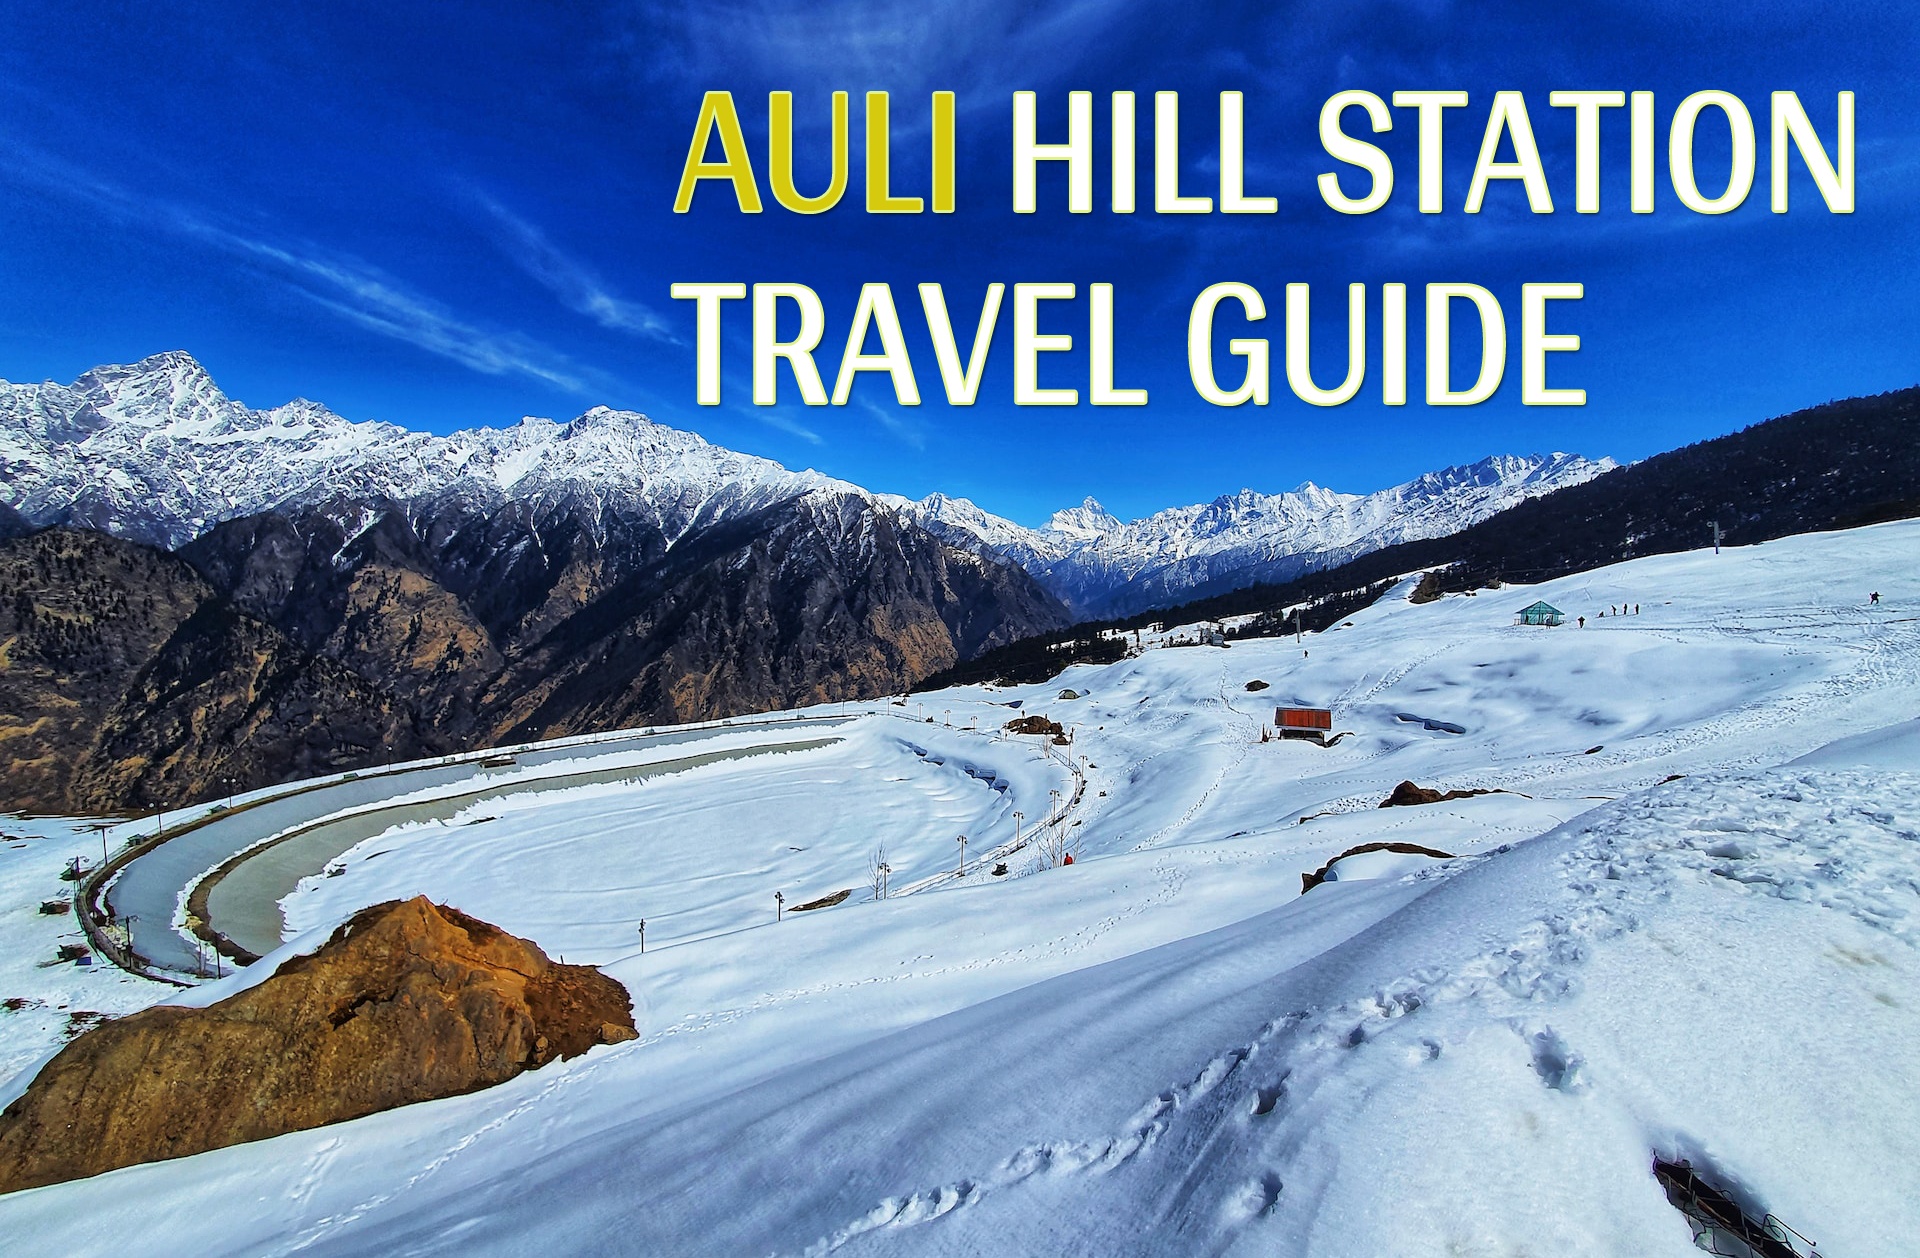 Travel Plan for Auli hill station – Places to Visit – Things to Do in Auli and more